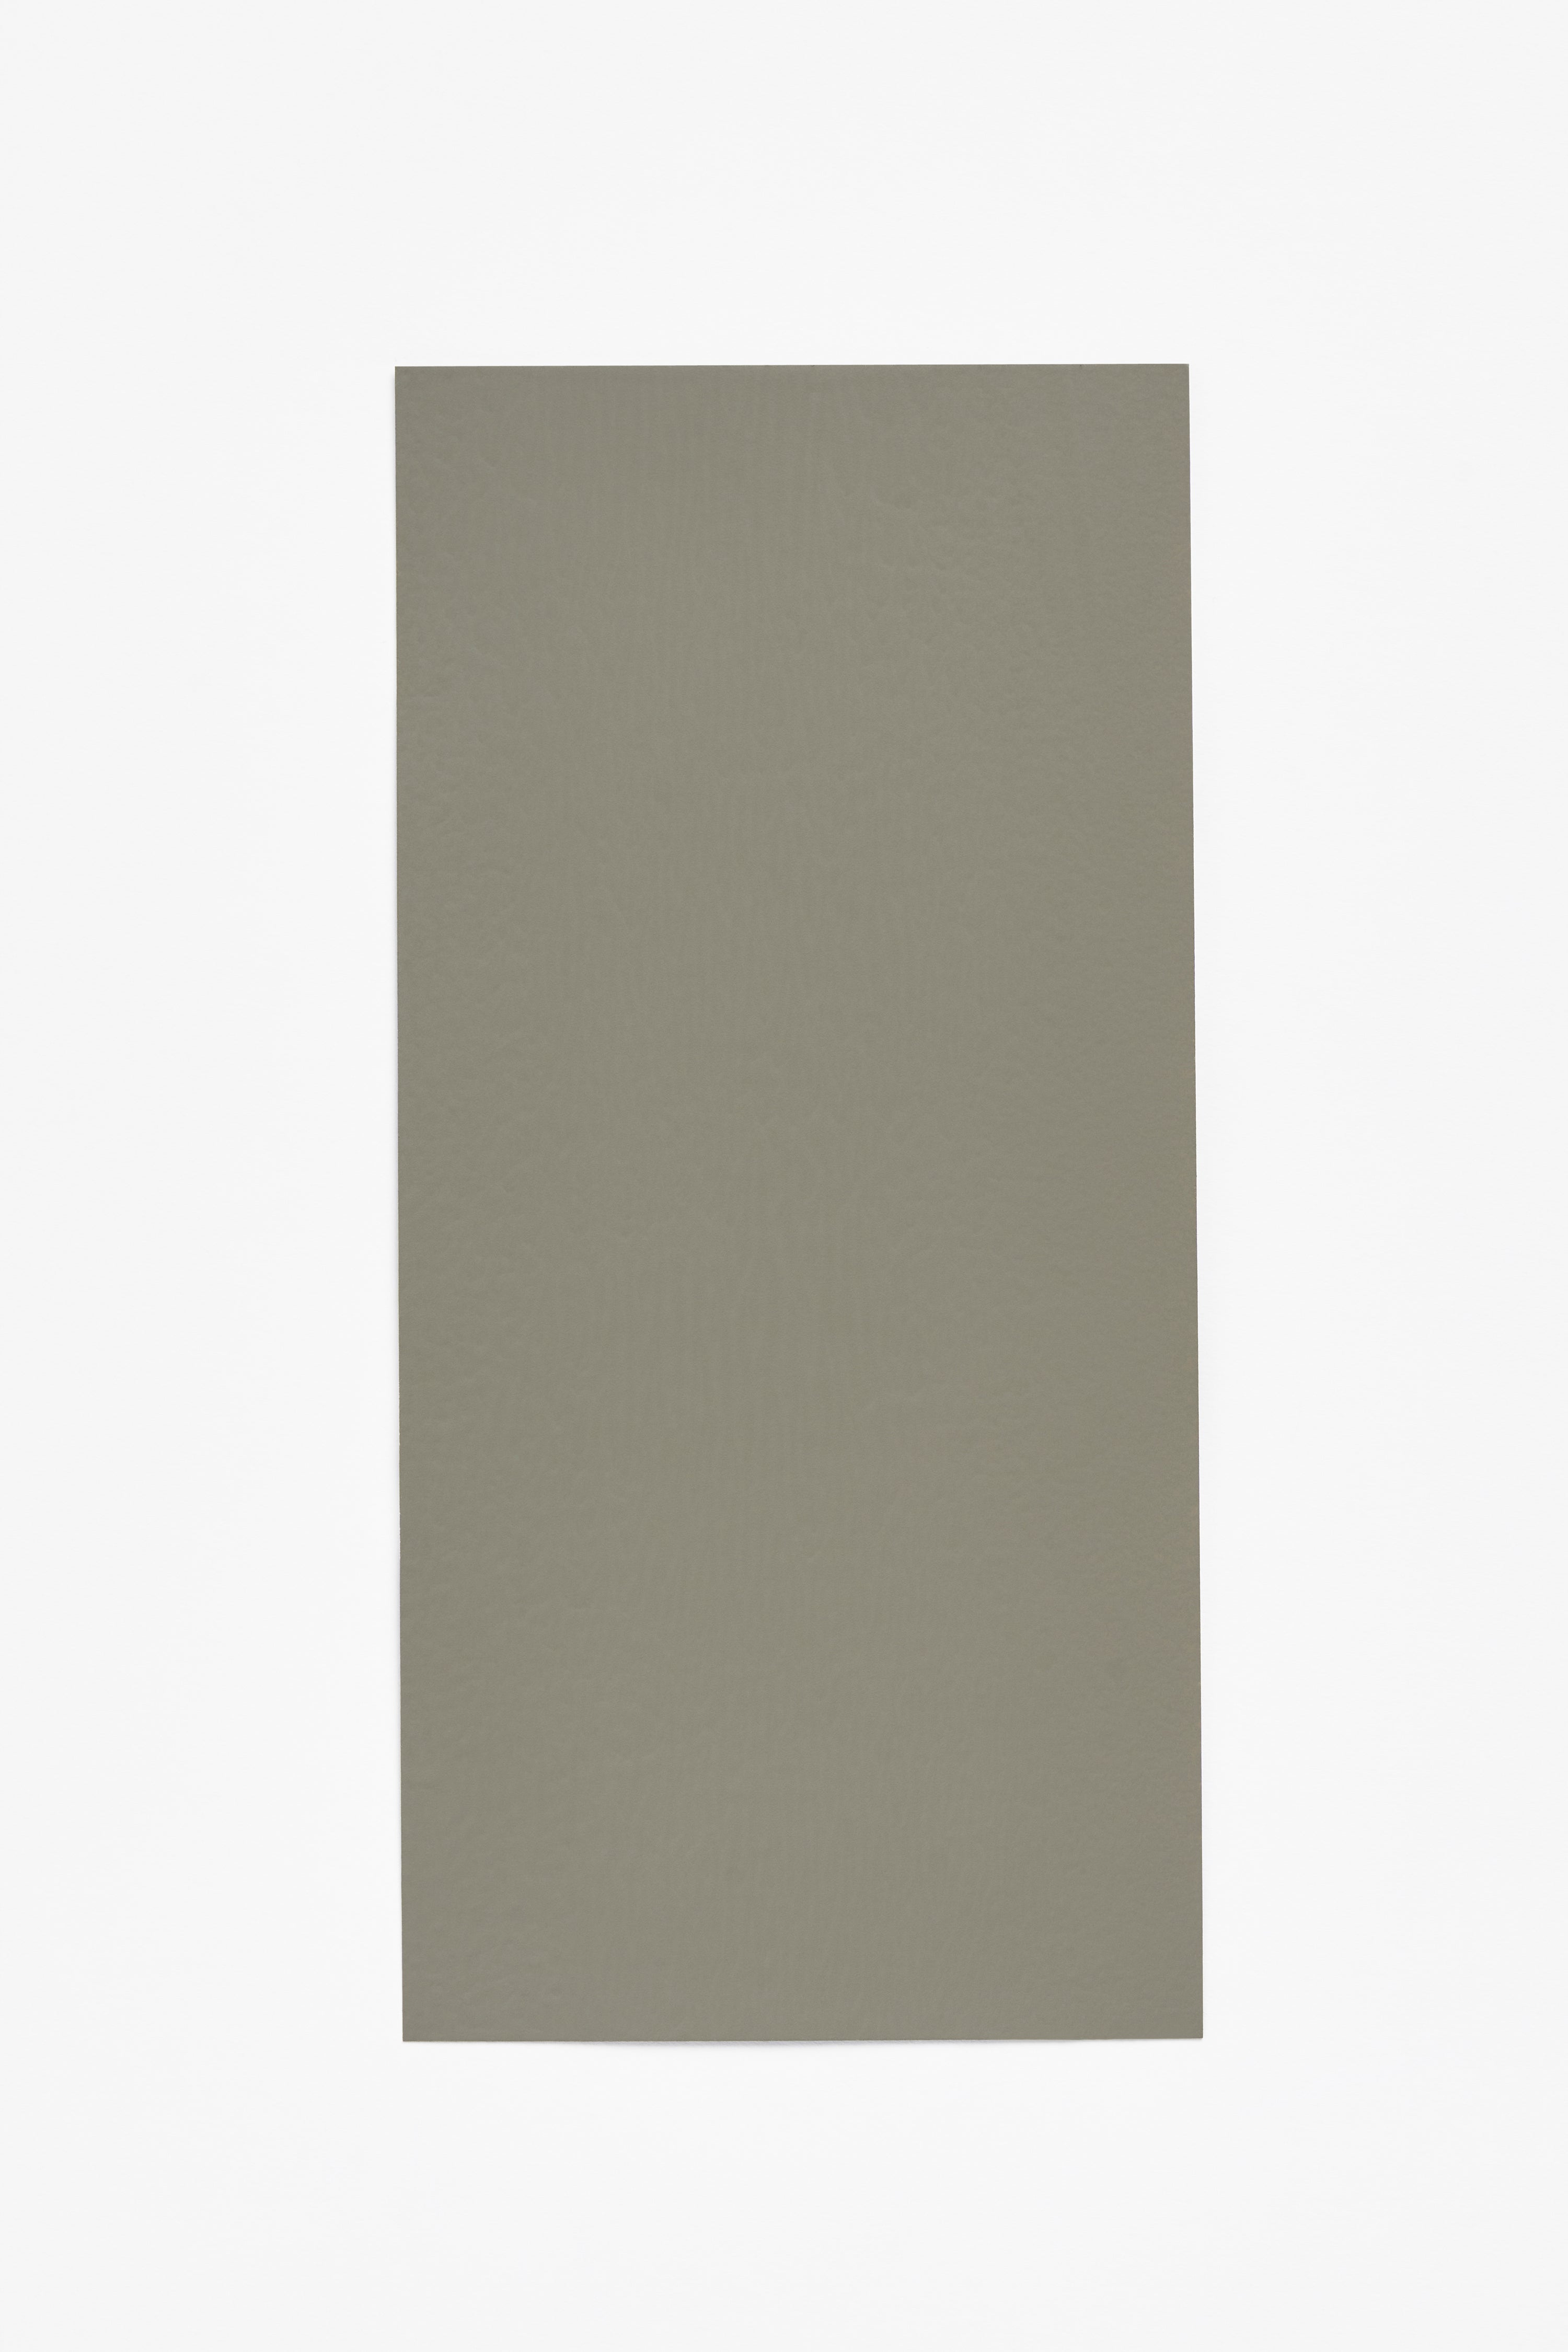 Hazy Forest — a paint colour developed by Norm Architects for Blēo